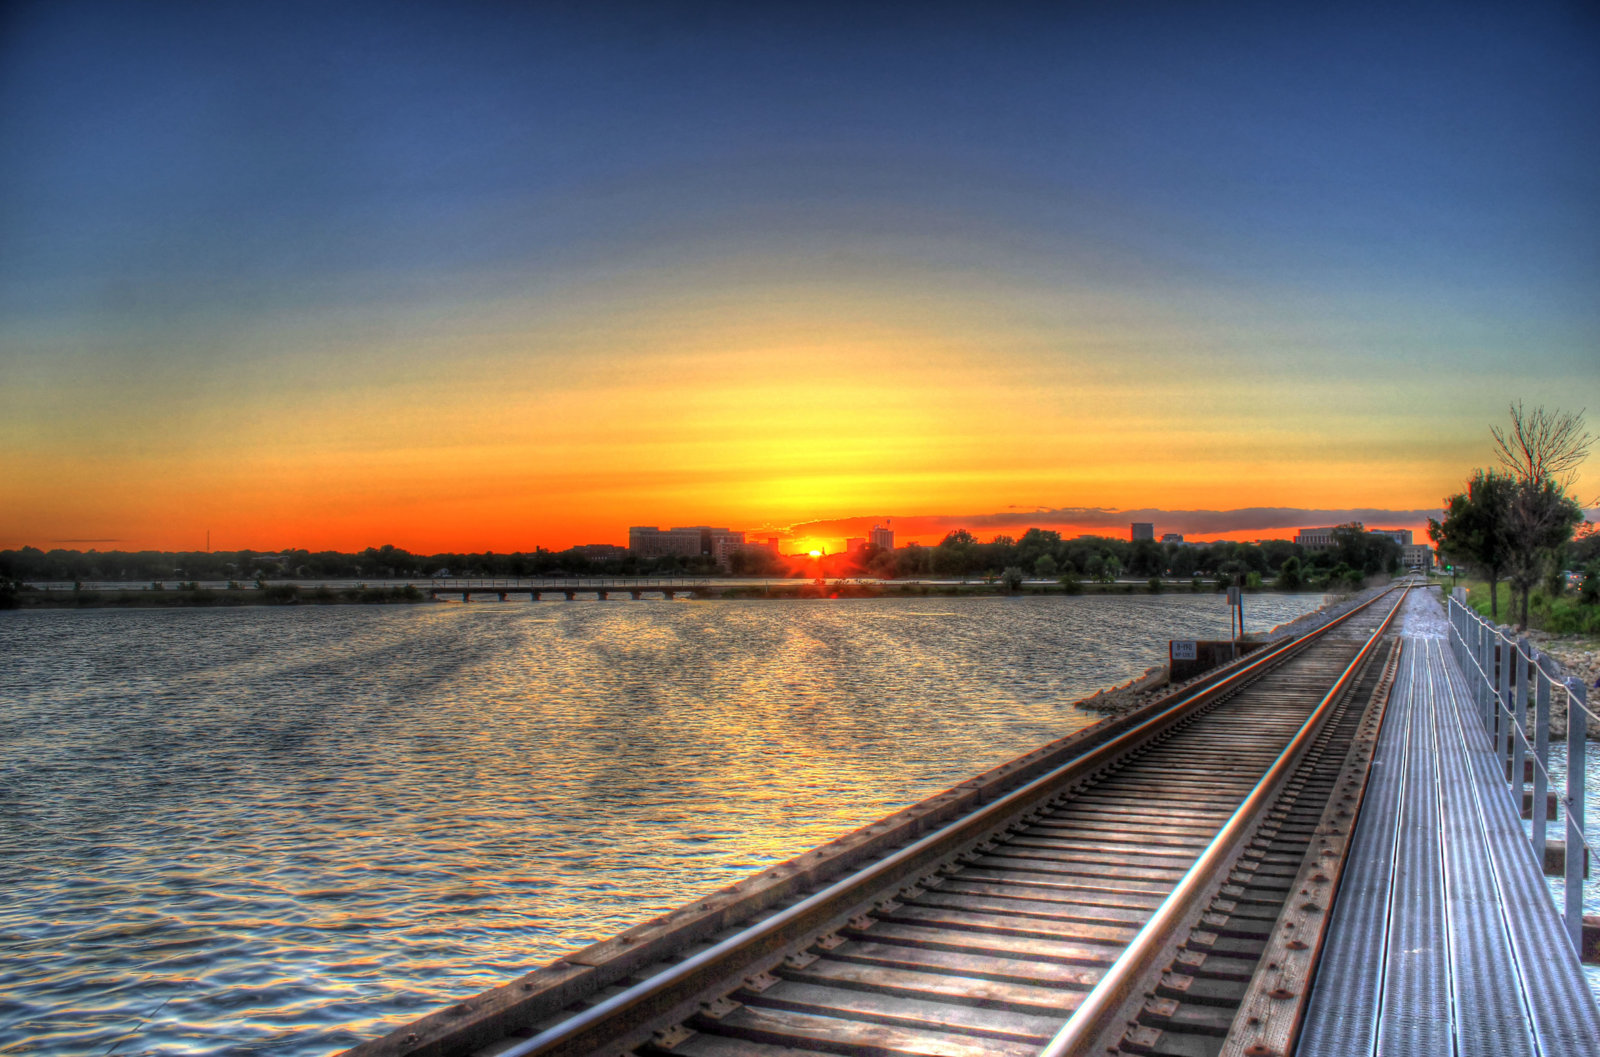 Gfp-wisconsin-madison-sunset-over-the-train-tracks-by-the-lake.jpg